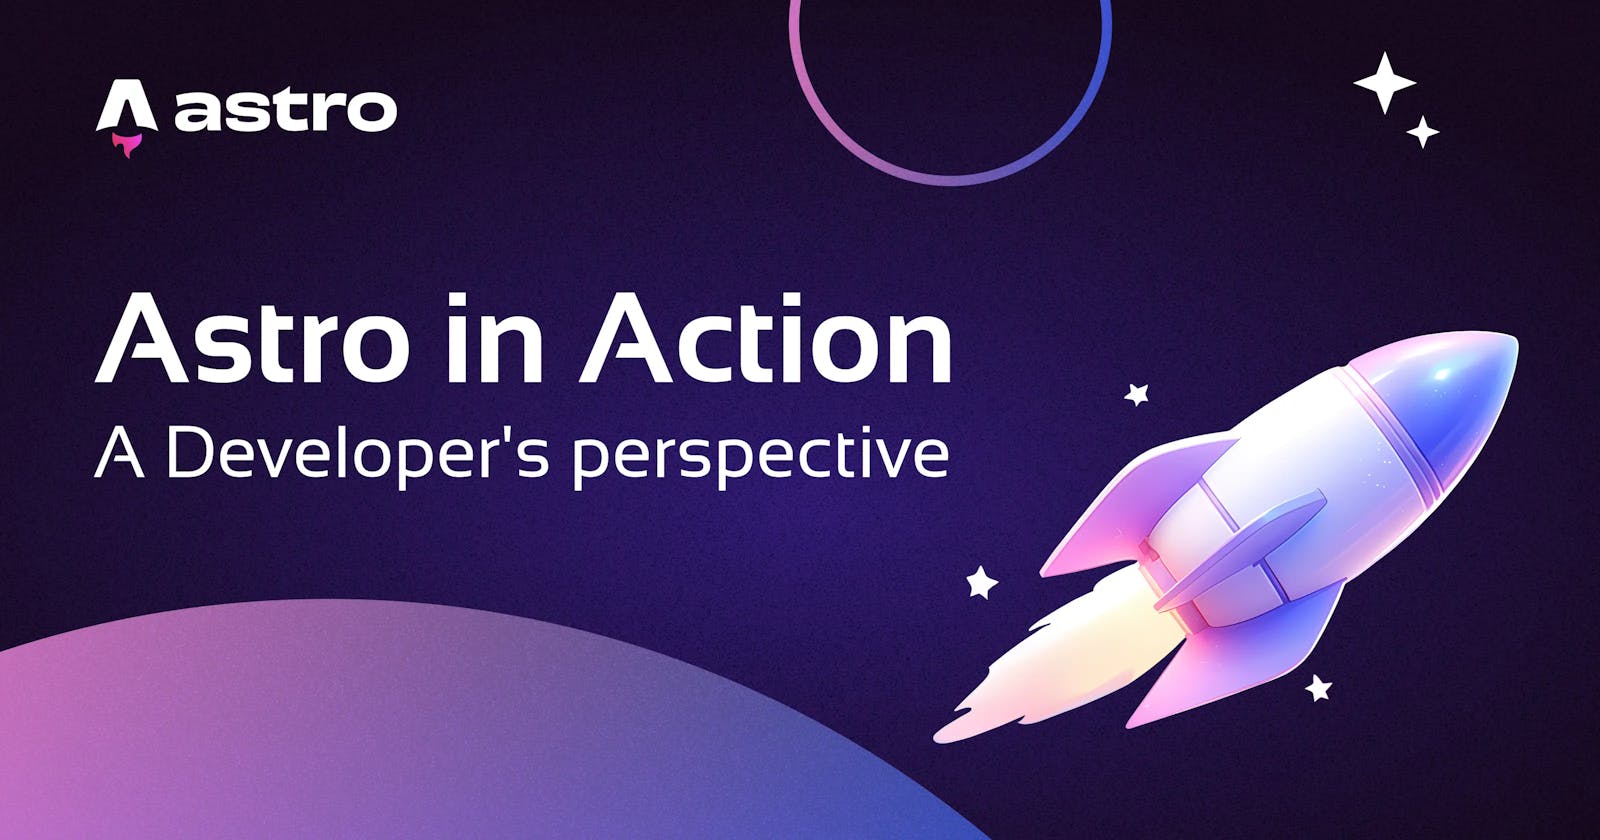 Astro in action: A developer's perspective